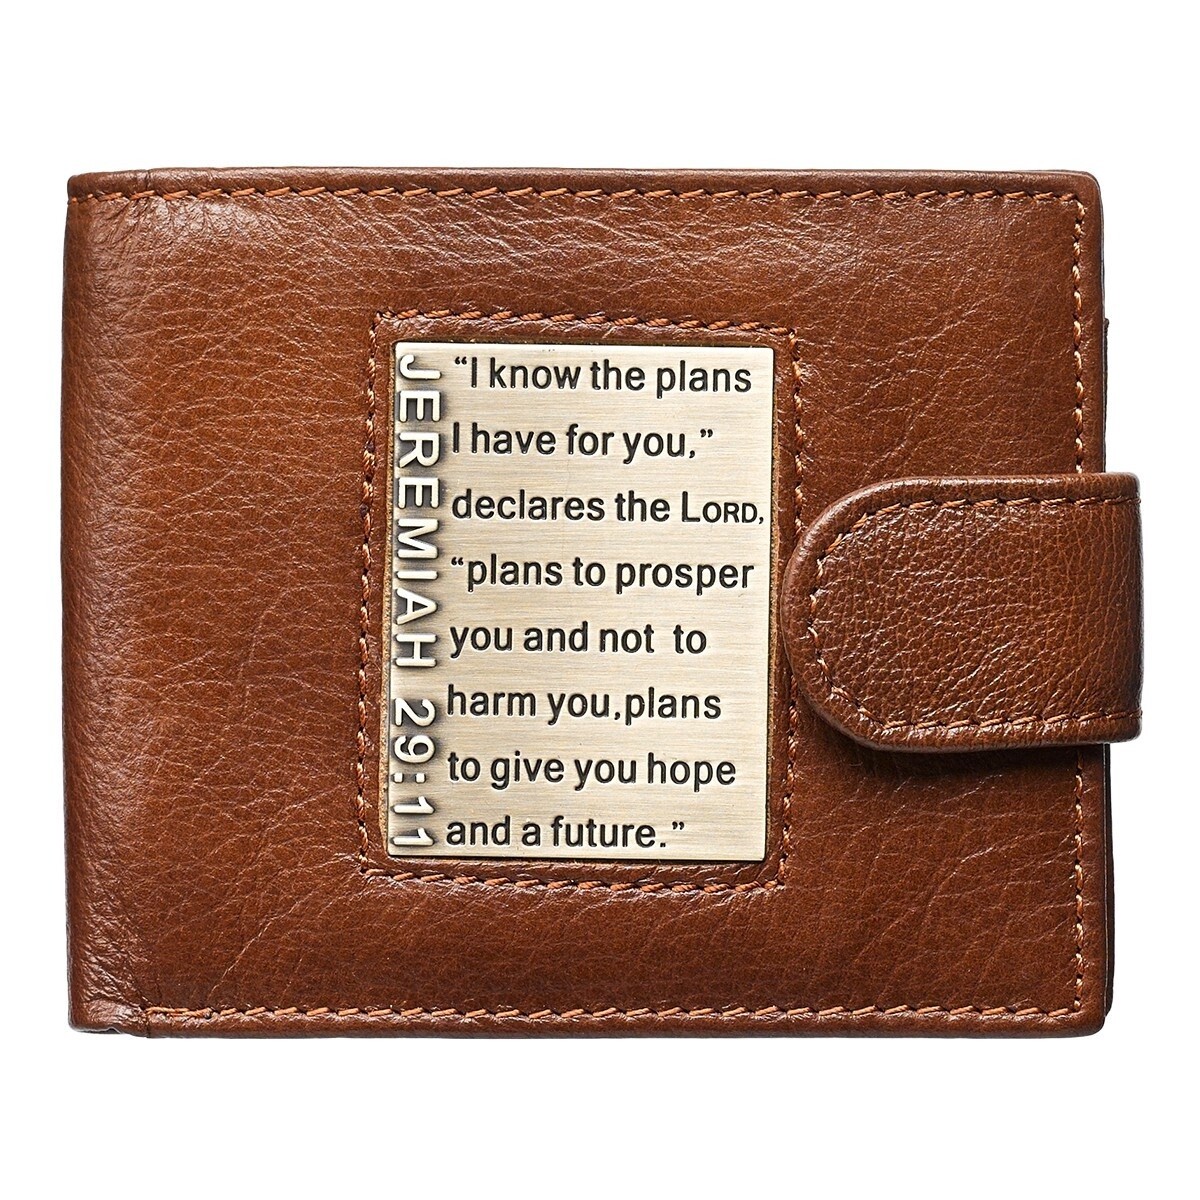 I Know the Plans Timber Spice Brown Genuine Leather Wallet with Brass Inlay Jeremiah 29:11